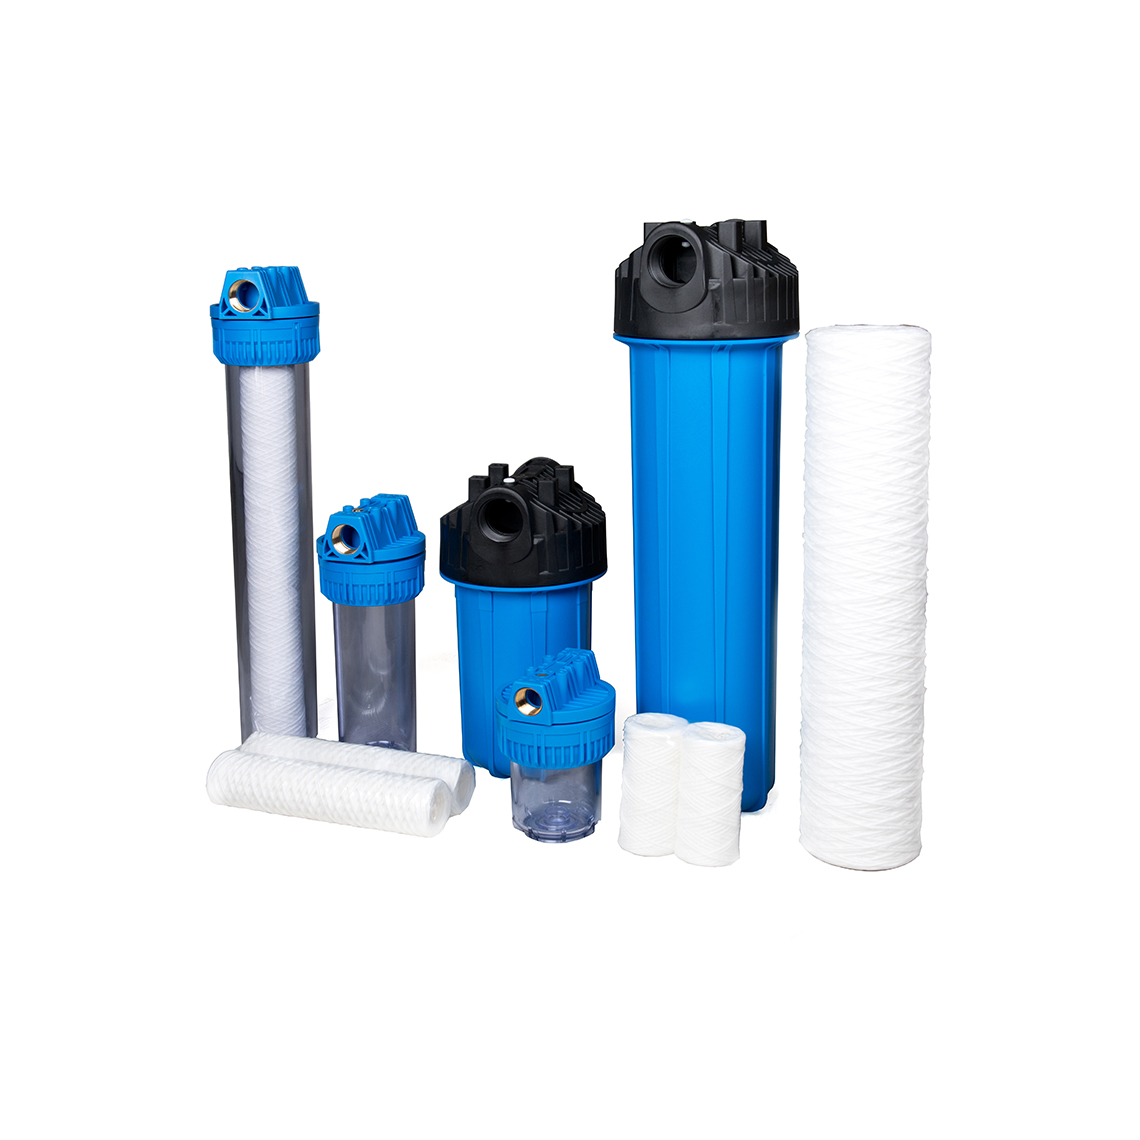 Filters, filter cartridges and housings